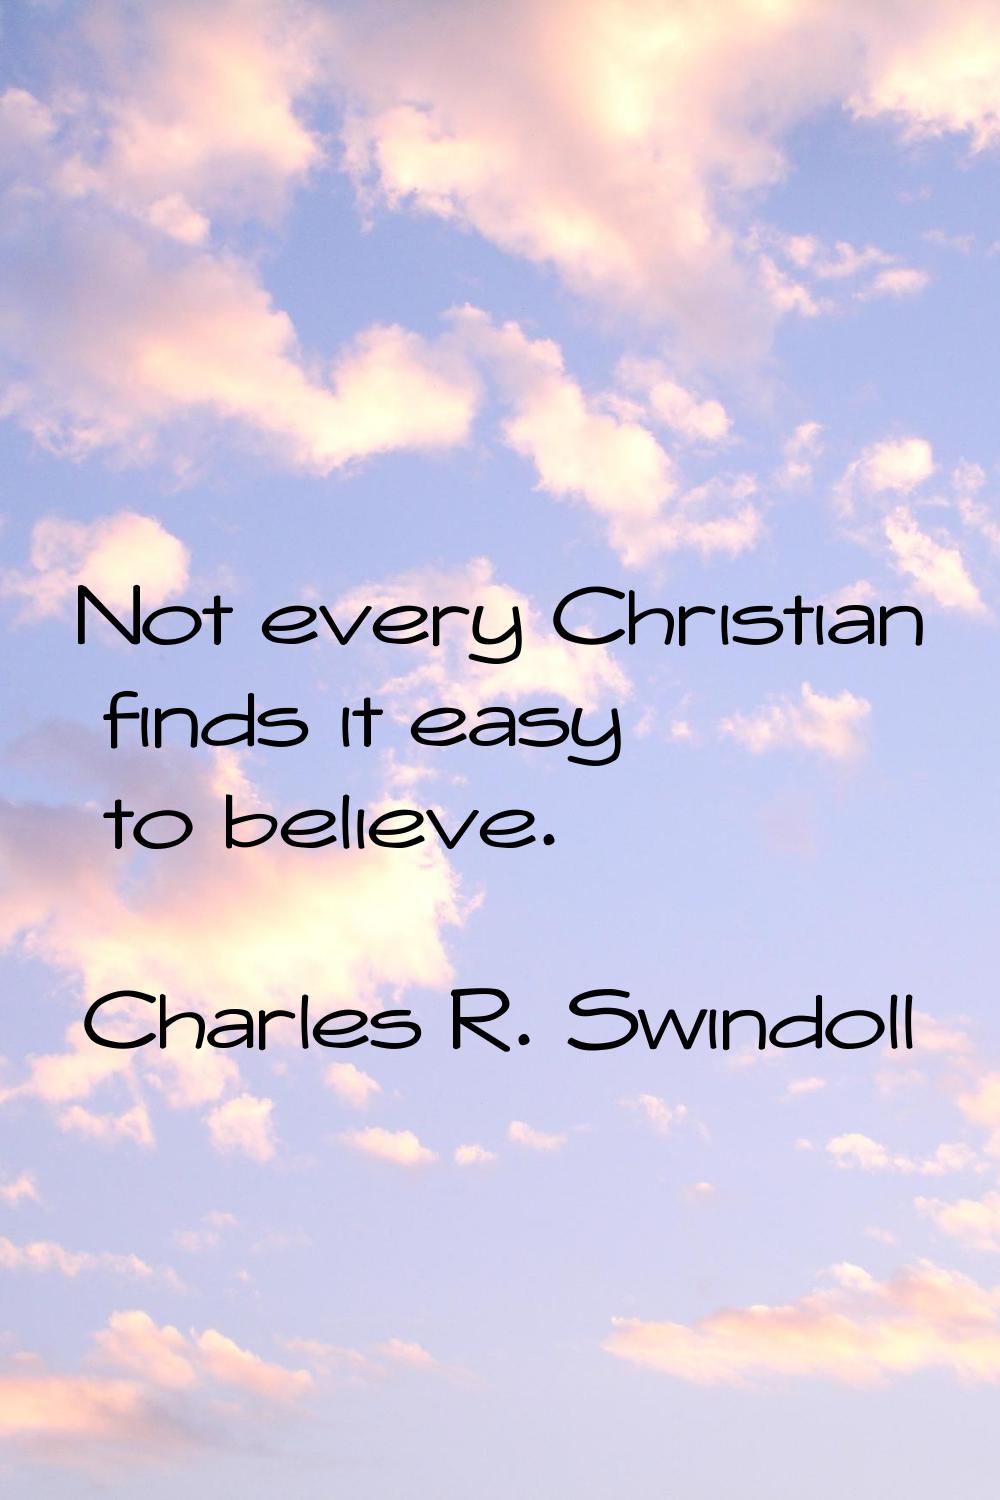 Not every Christian finds it easy to believe.